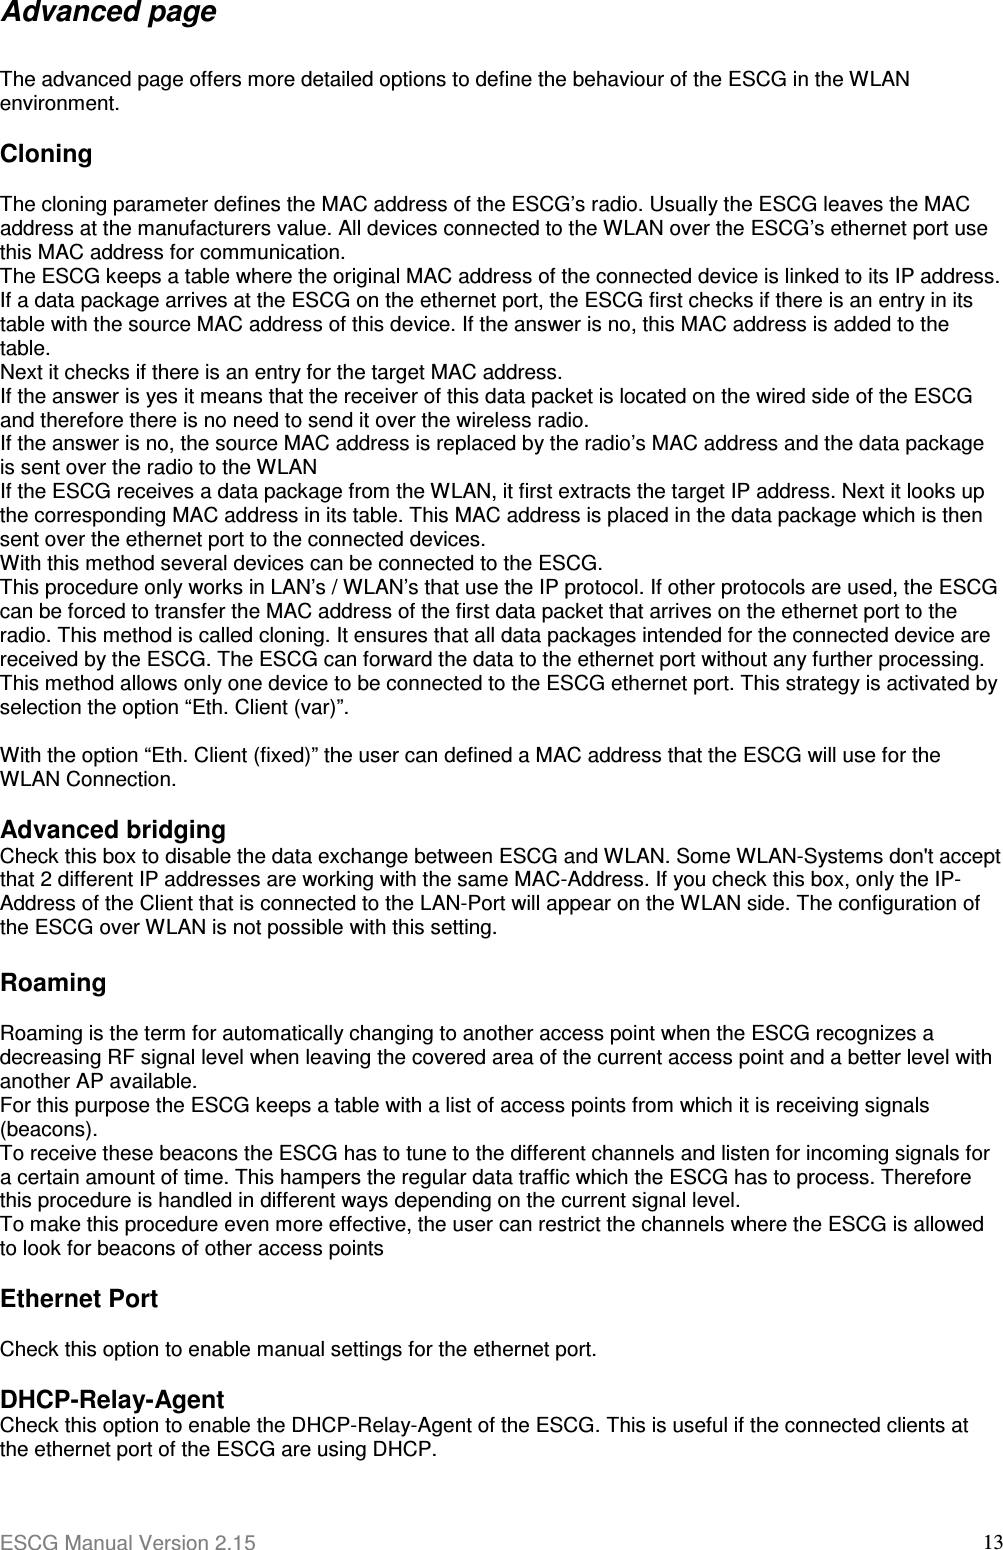 ESCG Manual Version 2.15  13Advanced page  The advanced page offers more detailed options to define the behaviour of the ESCG in the WLAN environment.  Cloning  The cloning parameter defines the MAC address of the ESCG’s radio. Usually the ESCG leaves the MAC address at the manufacturers value. All devices connected to the WLAN over the ESCG’s ethernet port use this MAC address for communication. The ESCG keeps a table where the original MAC address of the connected device is linked to its IP address.  If a data package arrives at the ESCG on the ethernet port, the ESCG first checks if there is an entry in its table with the source MAC address of this device. If the answer is no, this MAC address is added to the table.  Next it checks if there is an entry for the target MAC address.  If the answer is yes it means that the receiver of this data packet is located on the wired side of the ESCG and therefore there is no need to send it over the wireless radio. If the answer is no, the source MAC address is replaced by the radio’s MAC address and the data package is sent over the radio to the WLAN If the ESCG receives a data package from the WLAN, it first extracts the target IP address. Next it looks up the corresponding MAC address in its table. This MAC address is placed in the data package which is then sent over the ethernet port to the connected devices. With this method several devices can be connected to the ESCG.  This procedure only works in LAN’s / WLAN’s that use the IP protocol. If other protocols are used, the ESCG can be forced to transfer the MAC address of the first data packet that arrives on the ethernet port to the radio. This method is called cloning. It ensures that all data packages intended for the connected device are received by the ESCG. The ESCG can forward the data to the ethernet port without any further processing.  This method allows only one device to be connected to the ESCG ethernet port. This strategy is activated by selection the option “Eth. Client (var)”.   With the option “Eth. Client (fixed)” the user can defined a MAC address that the ESCG will use for the WLAN Connection.   Advanced bridging Check this box to disable the data exchange between ESCG and WLAN. Some WLAN-Systems don&apos;t accept that 2 different IP addresses are working with the same MAC-Address. If you check this box, only the IP-Address of the Client that is connected to the LAN-Port will appear on the WLAN side. The configuration of the ESCG over WLAN is not possible with this setting.  Roaming  Roaming is the term for automatically changing to another access point when the ESCG recognizes a decreasing RF signal level when leaving the covered area of the current access point and a better level with another AP available.  For this purpose the ESCG keeps a table with a list of access points from which it is receiving signals (beacons). To receive these beacons the ESCG has to tune to the different channels and listen for incoming signals for a certain amount of time. This hampers the regular data traffic which the ESCG has to process. Therefore this procedure is handled in different ways depending on the current signal level. To make this procedure even more effective, the user can restrict the channels where the ESCG is allowed to look for beacons of other access points  Ethernet Port  Check this option to enable manual settings for the ethernet port.  DHCP-Relay-Agent Check this option to enable the DHCP-Relay-Agent of the ESCG. This is useful if the connected clients at the ethernet port of the ESCG are using DHCP. 